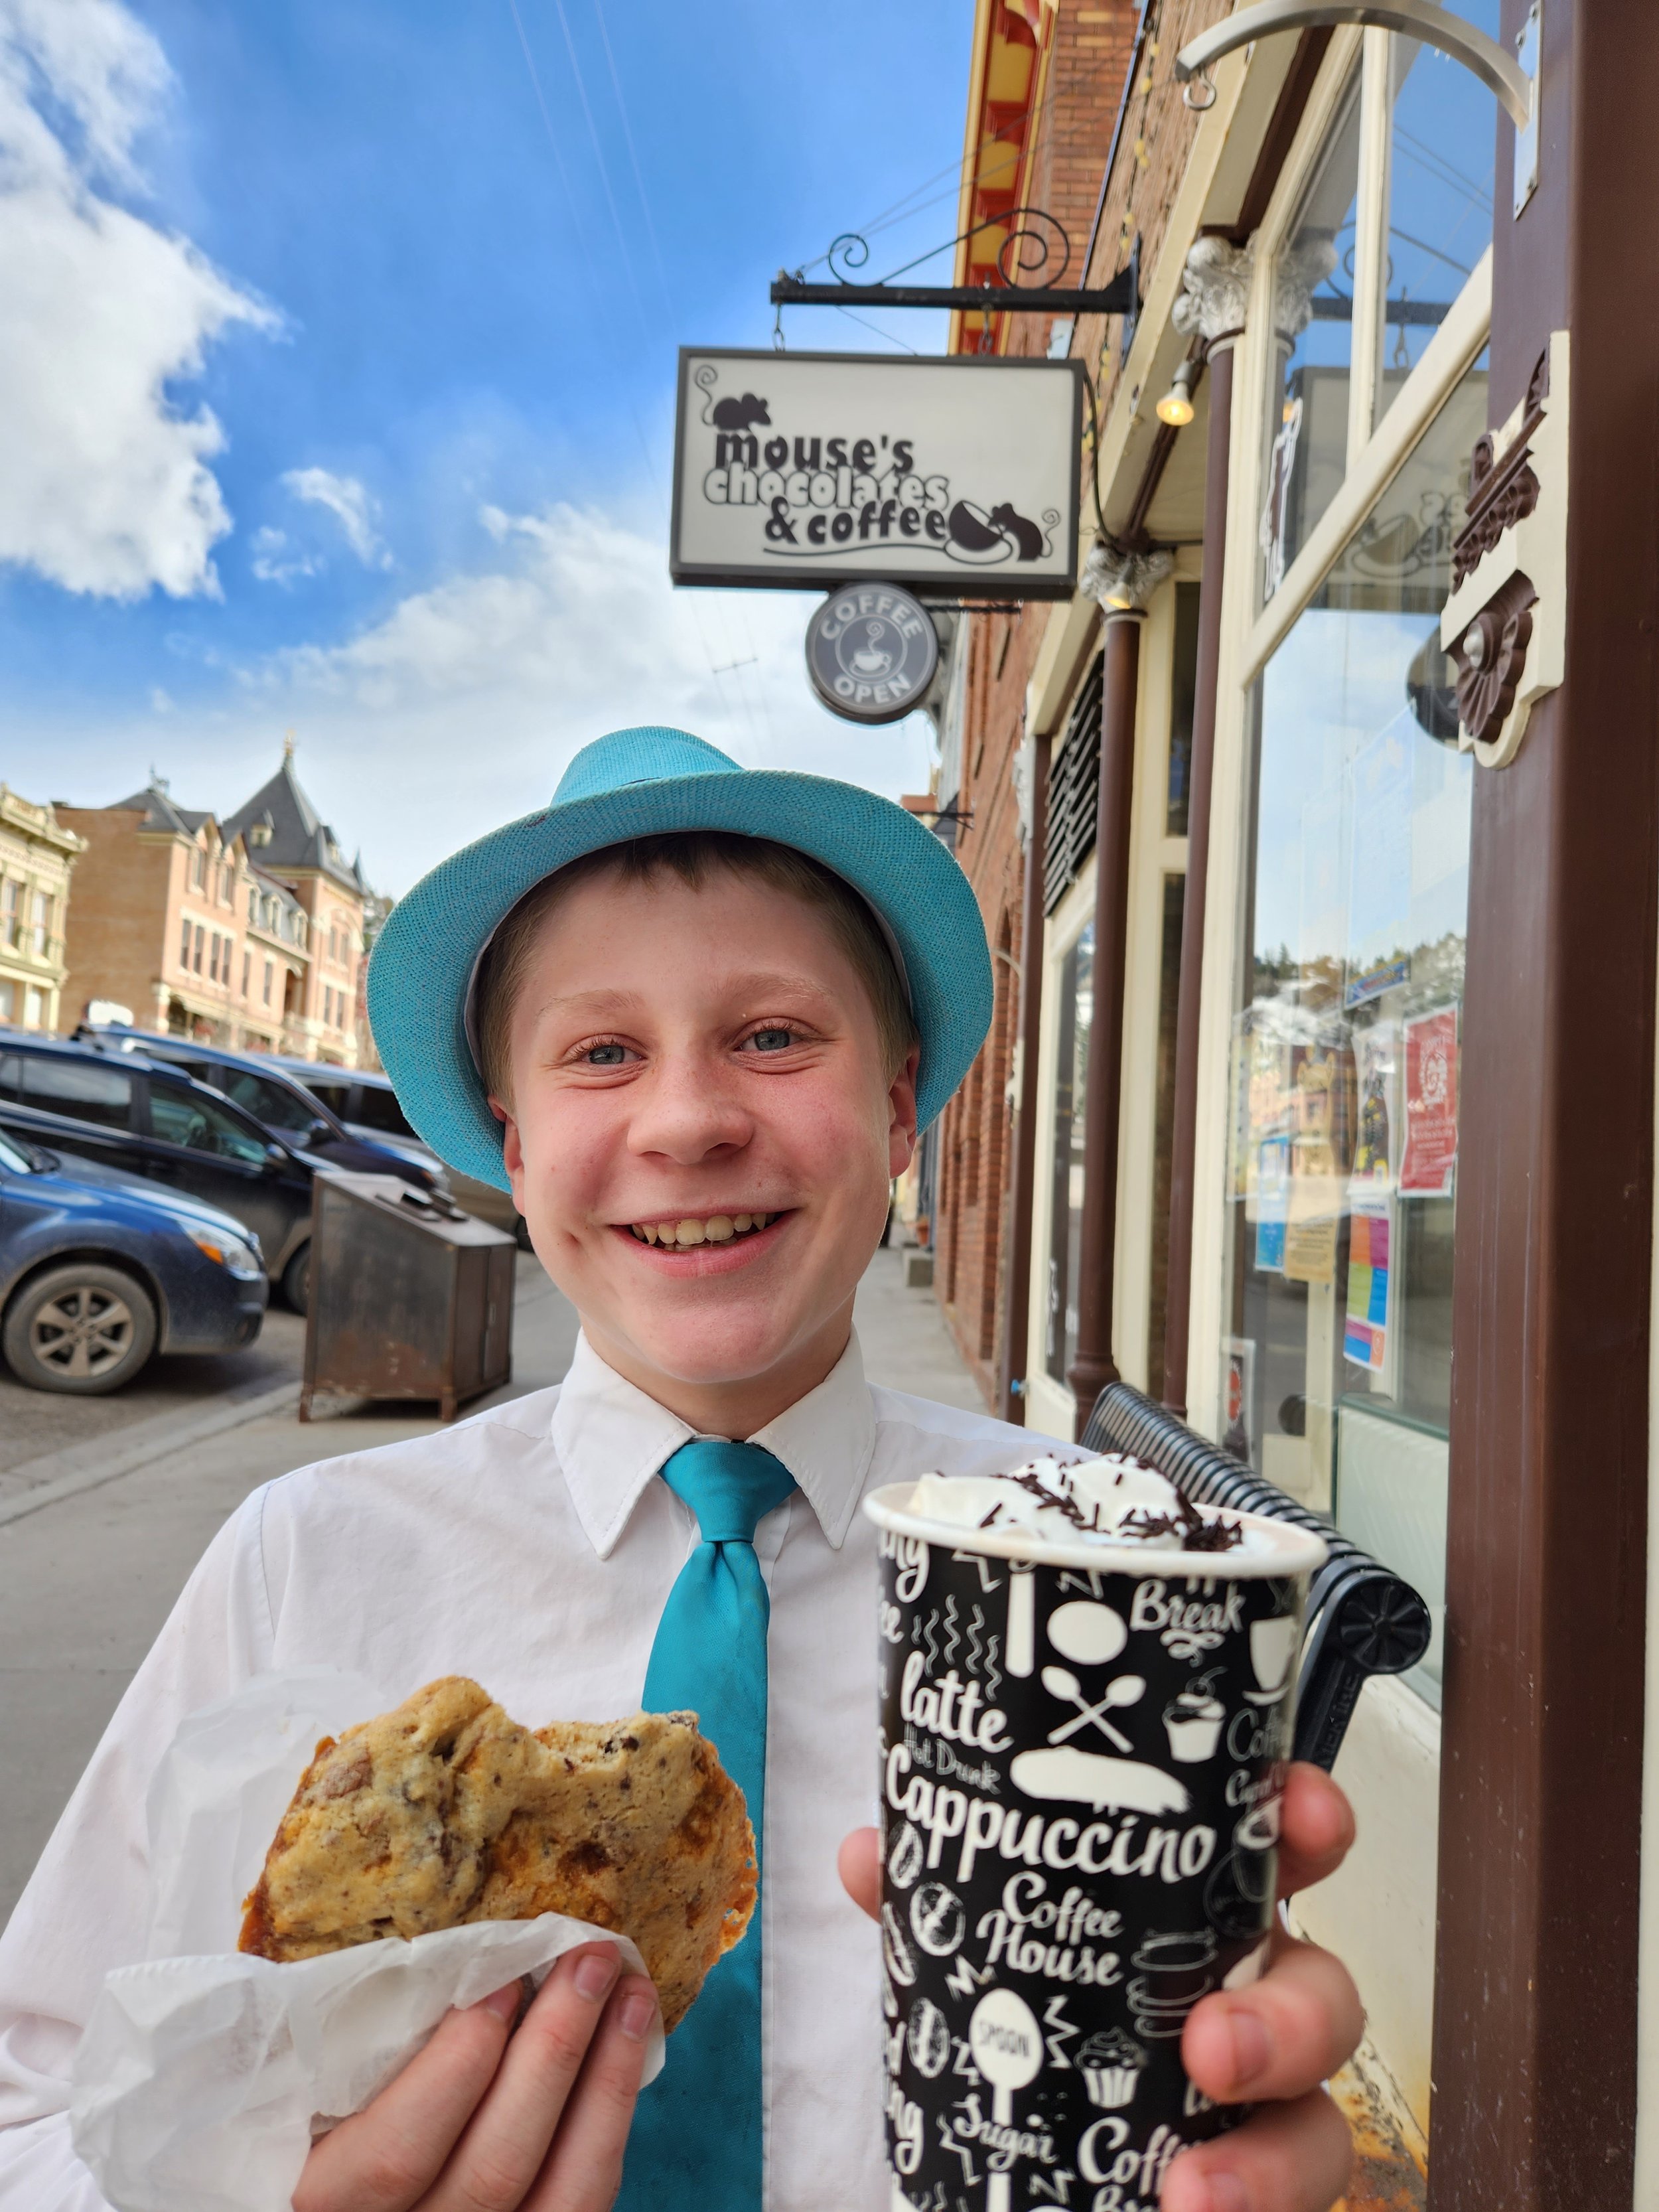 Boy holding ice cream and cookie